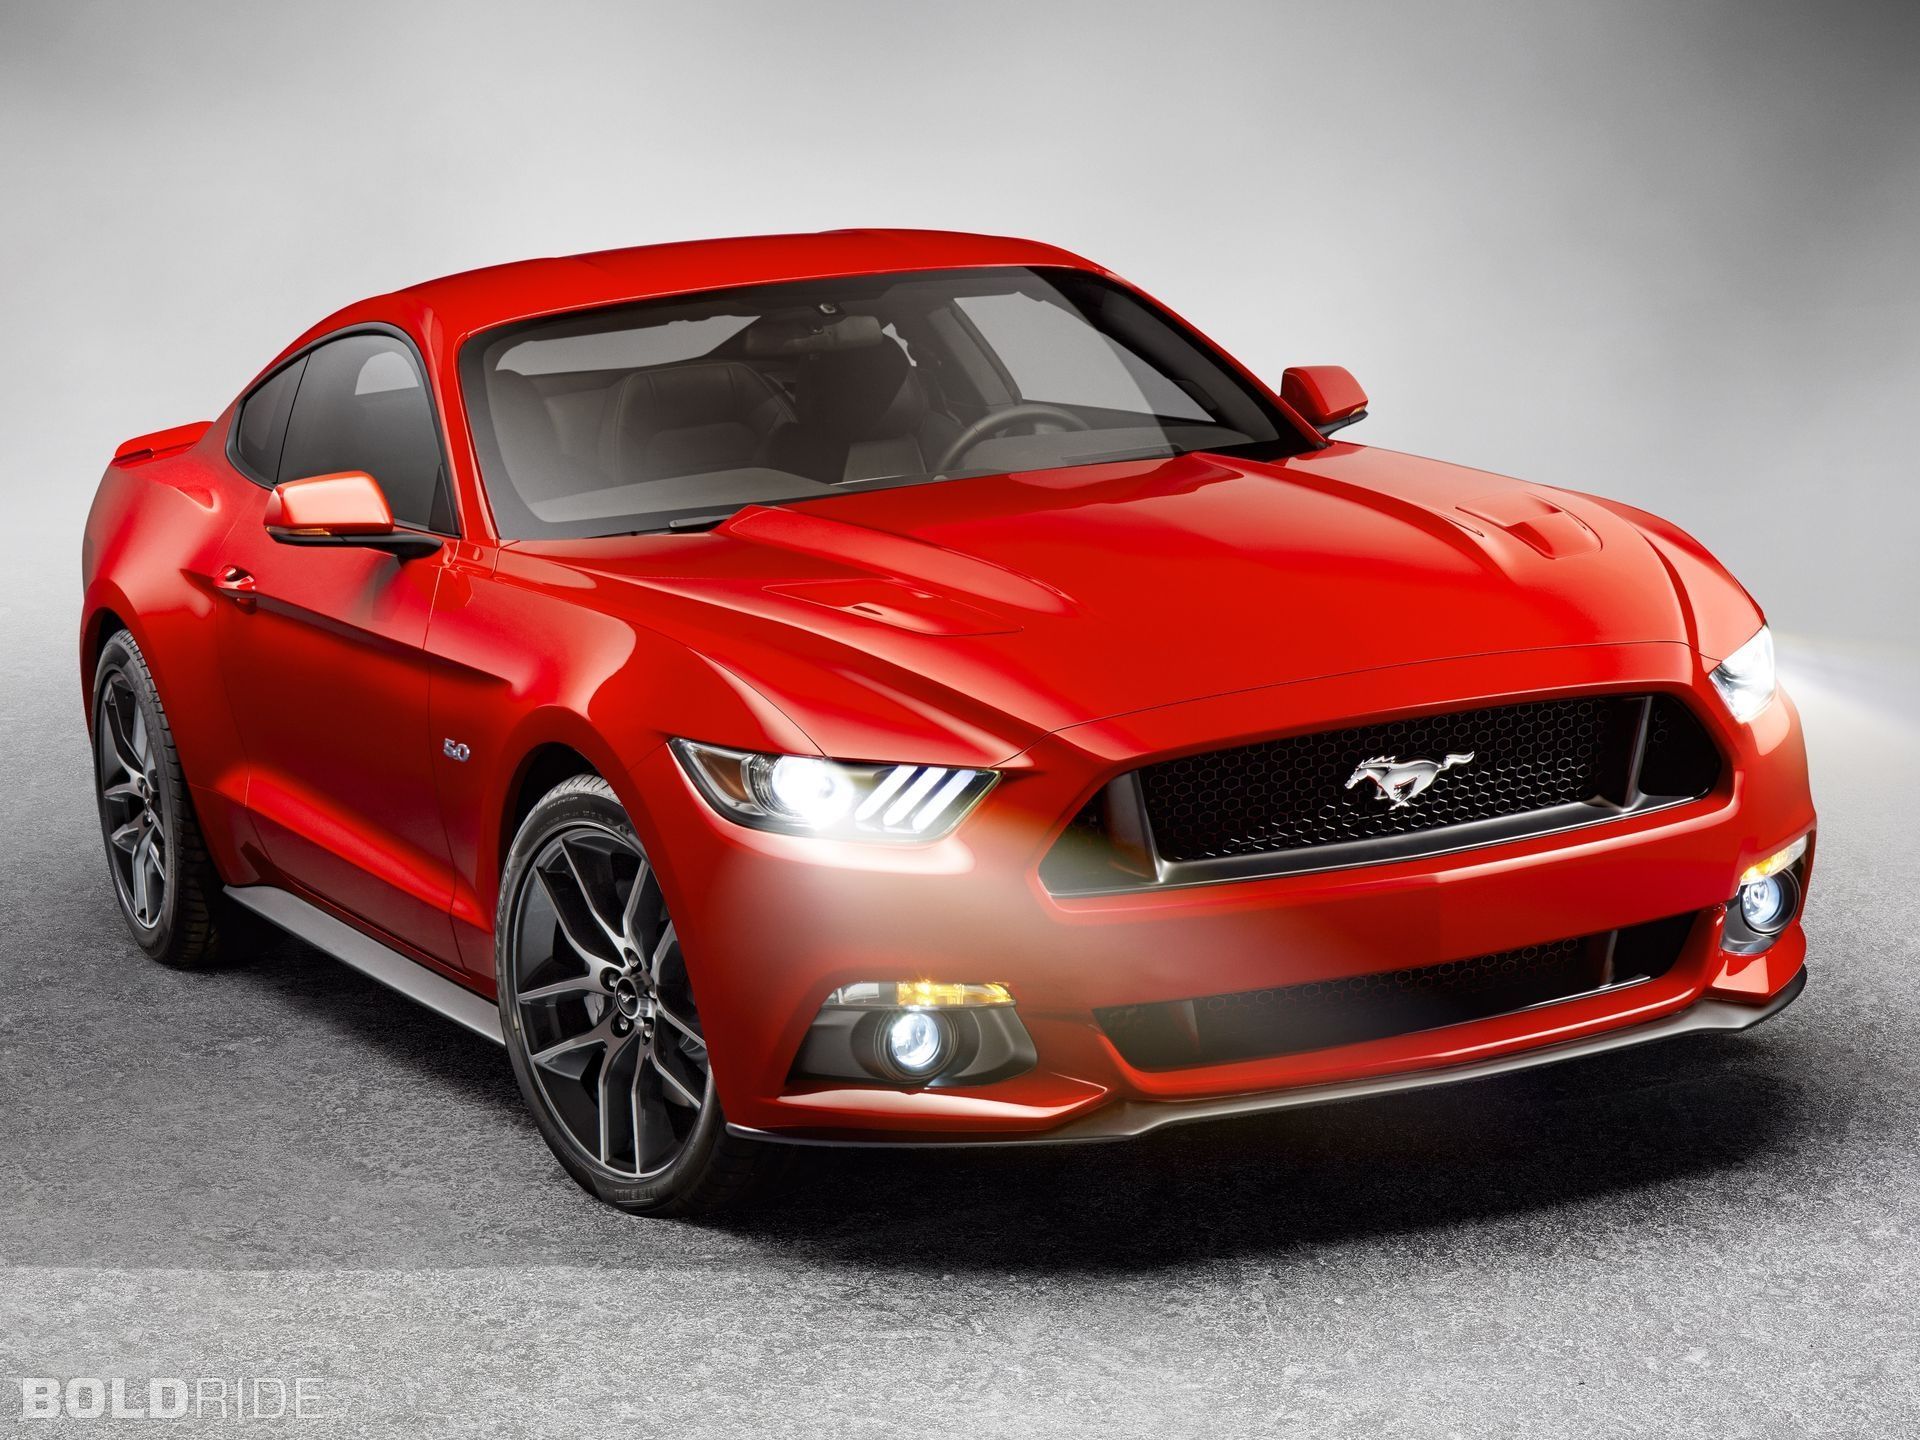 2015 Ford Mustang GT Images | Pictures and Videos